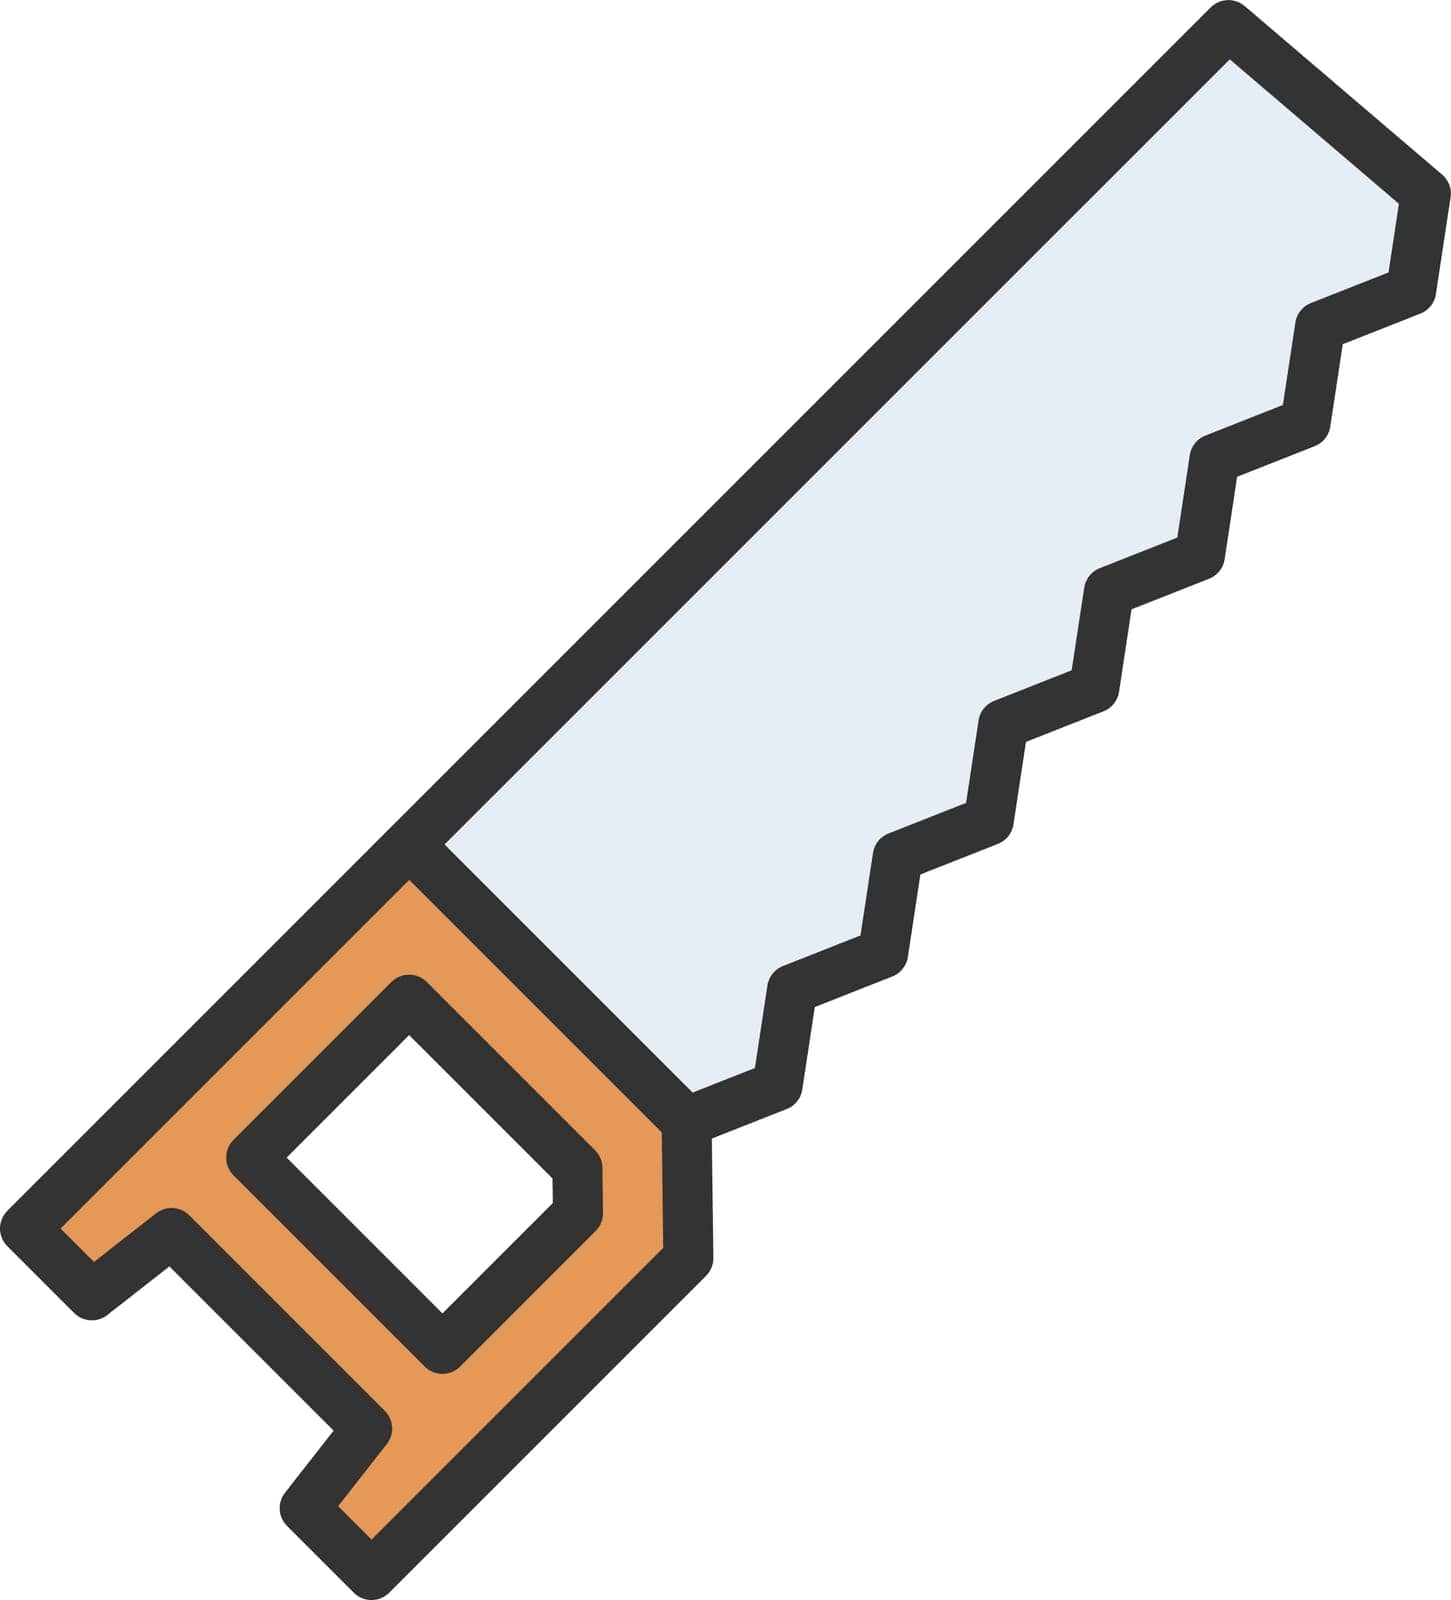 Handsaw icon vector image. Suitable for mobile application web application and print media.